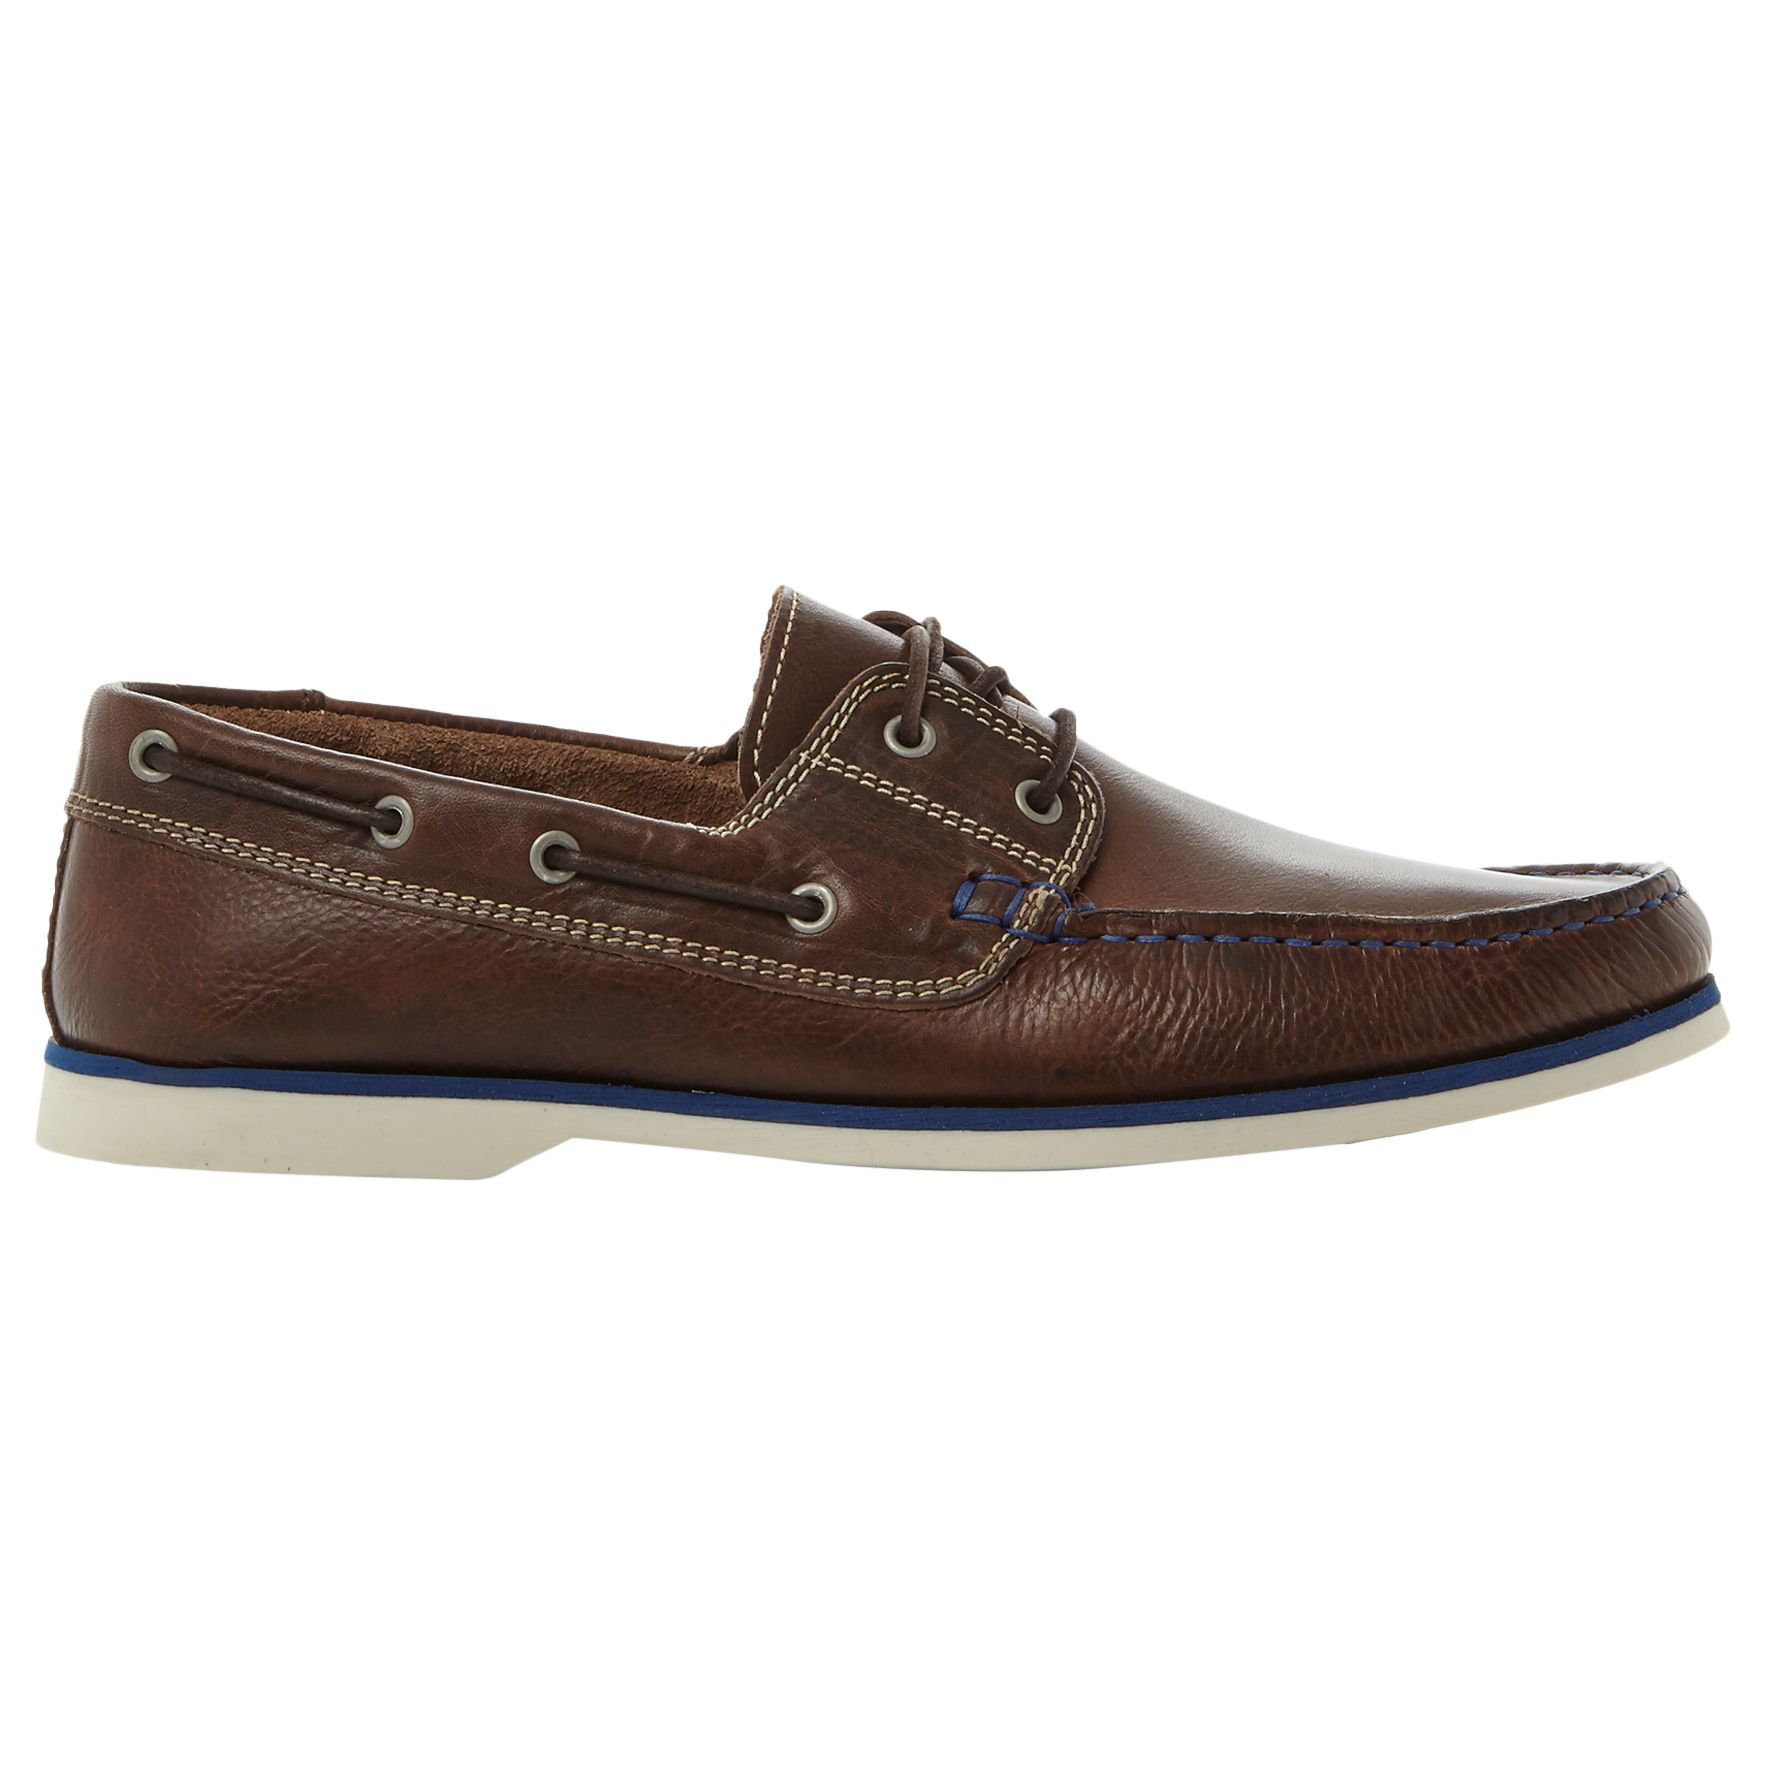 Bertie Battleship Leather Boat Shoes, Brown